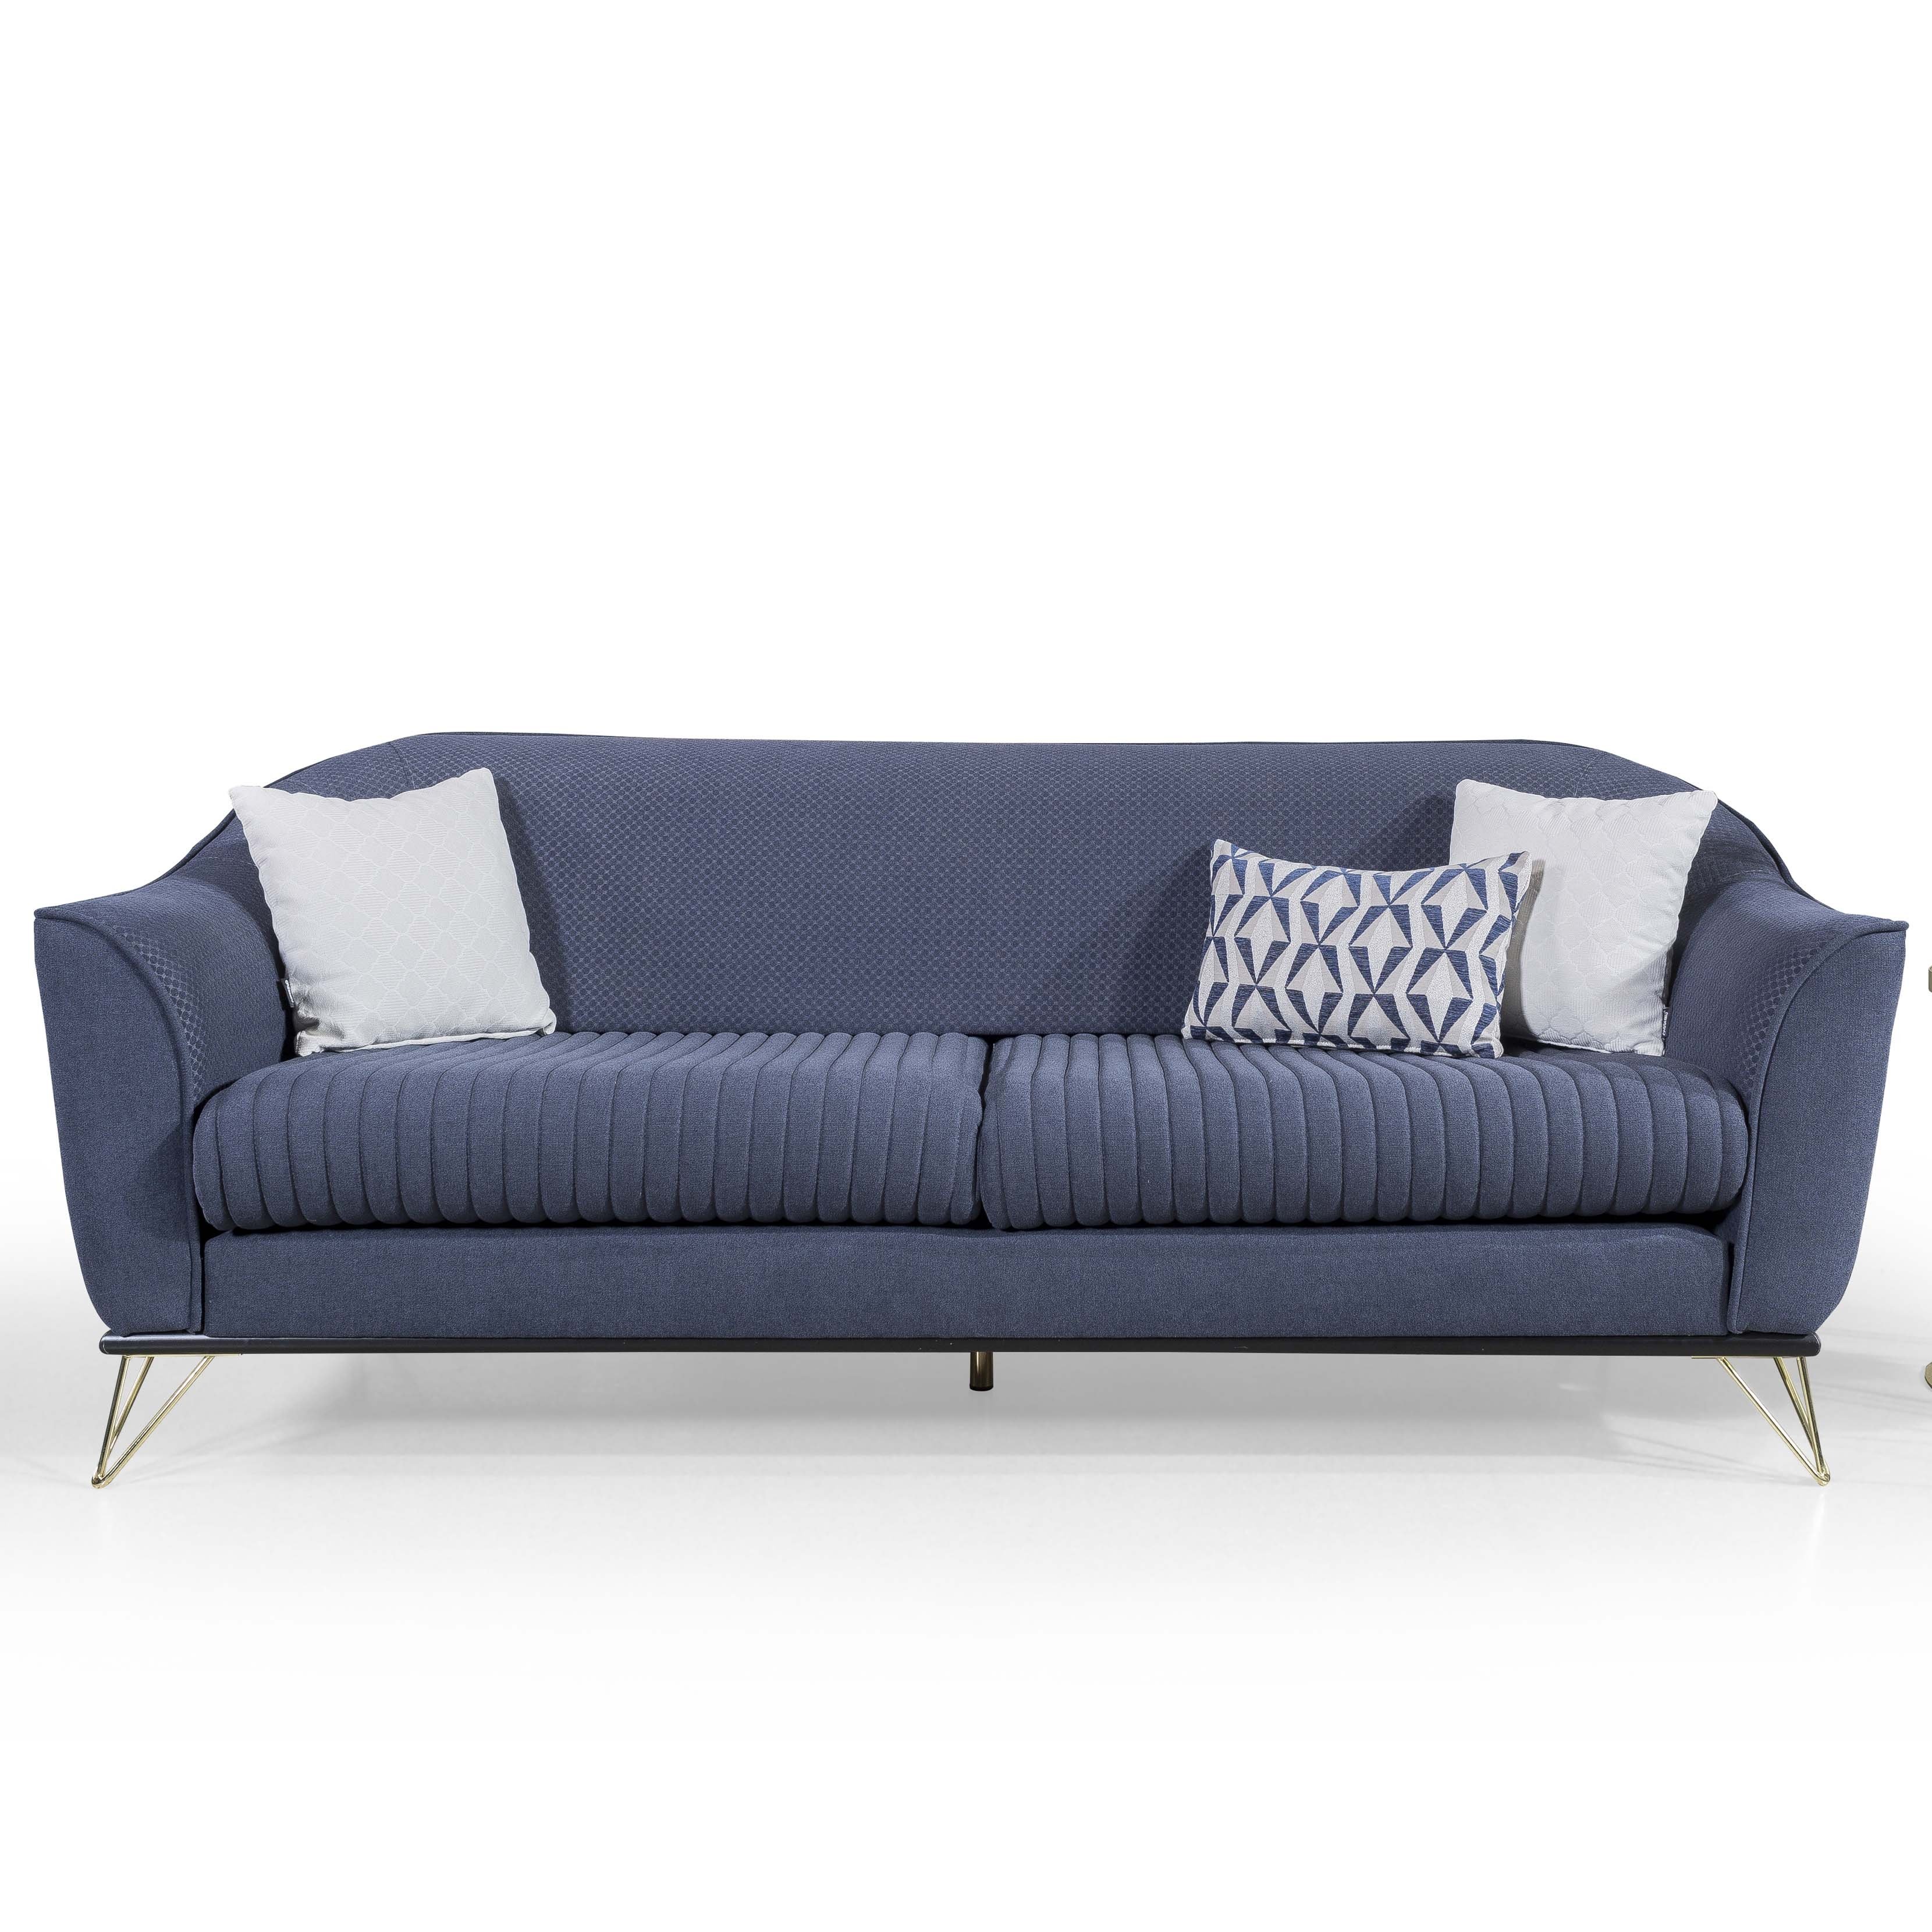 Lucca 3 Seater Sofa Bed